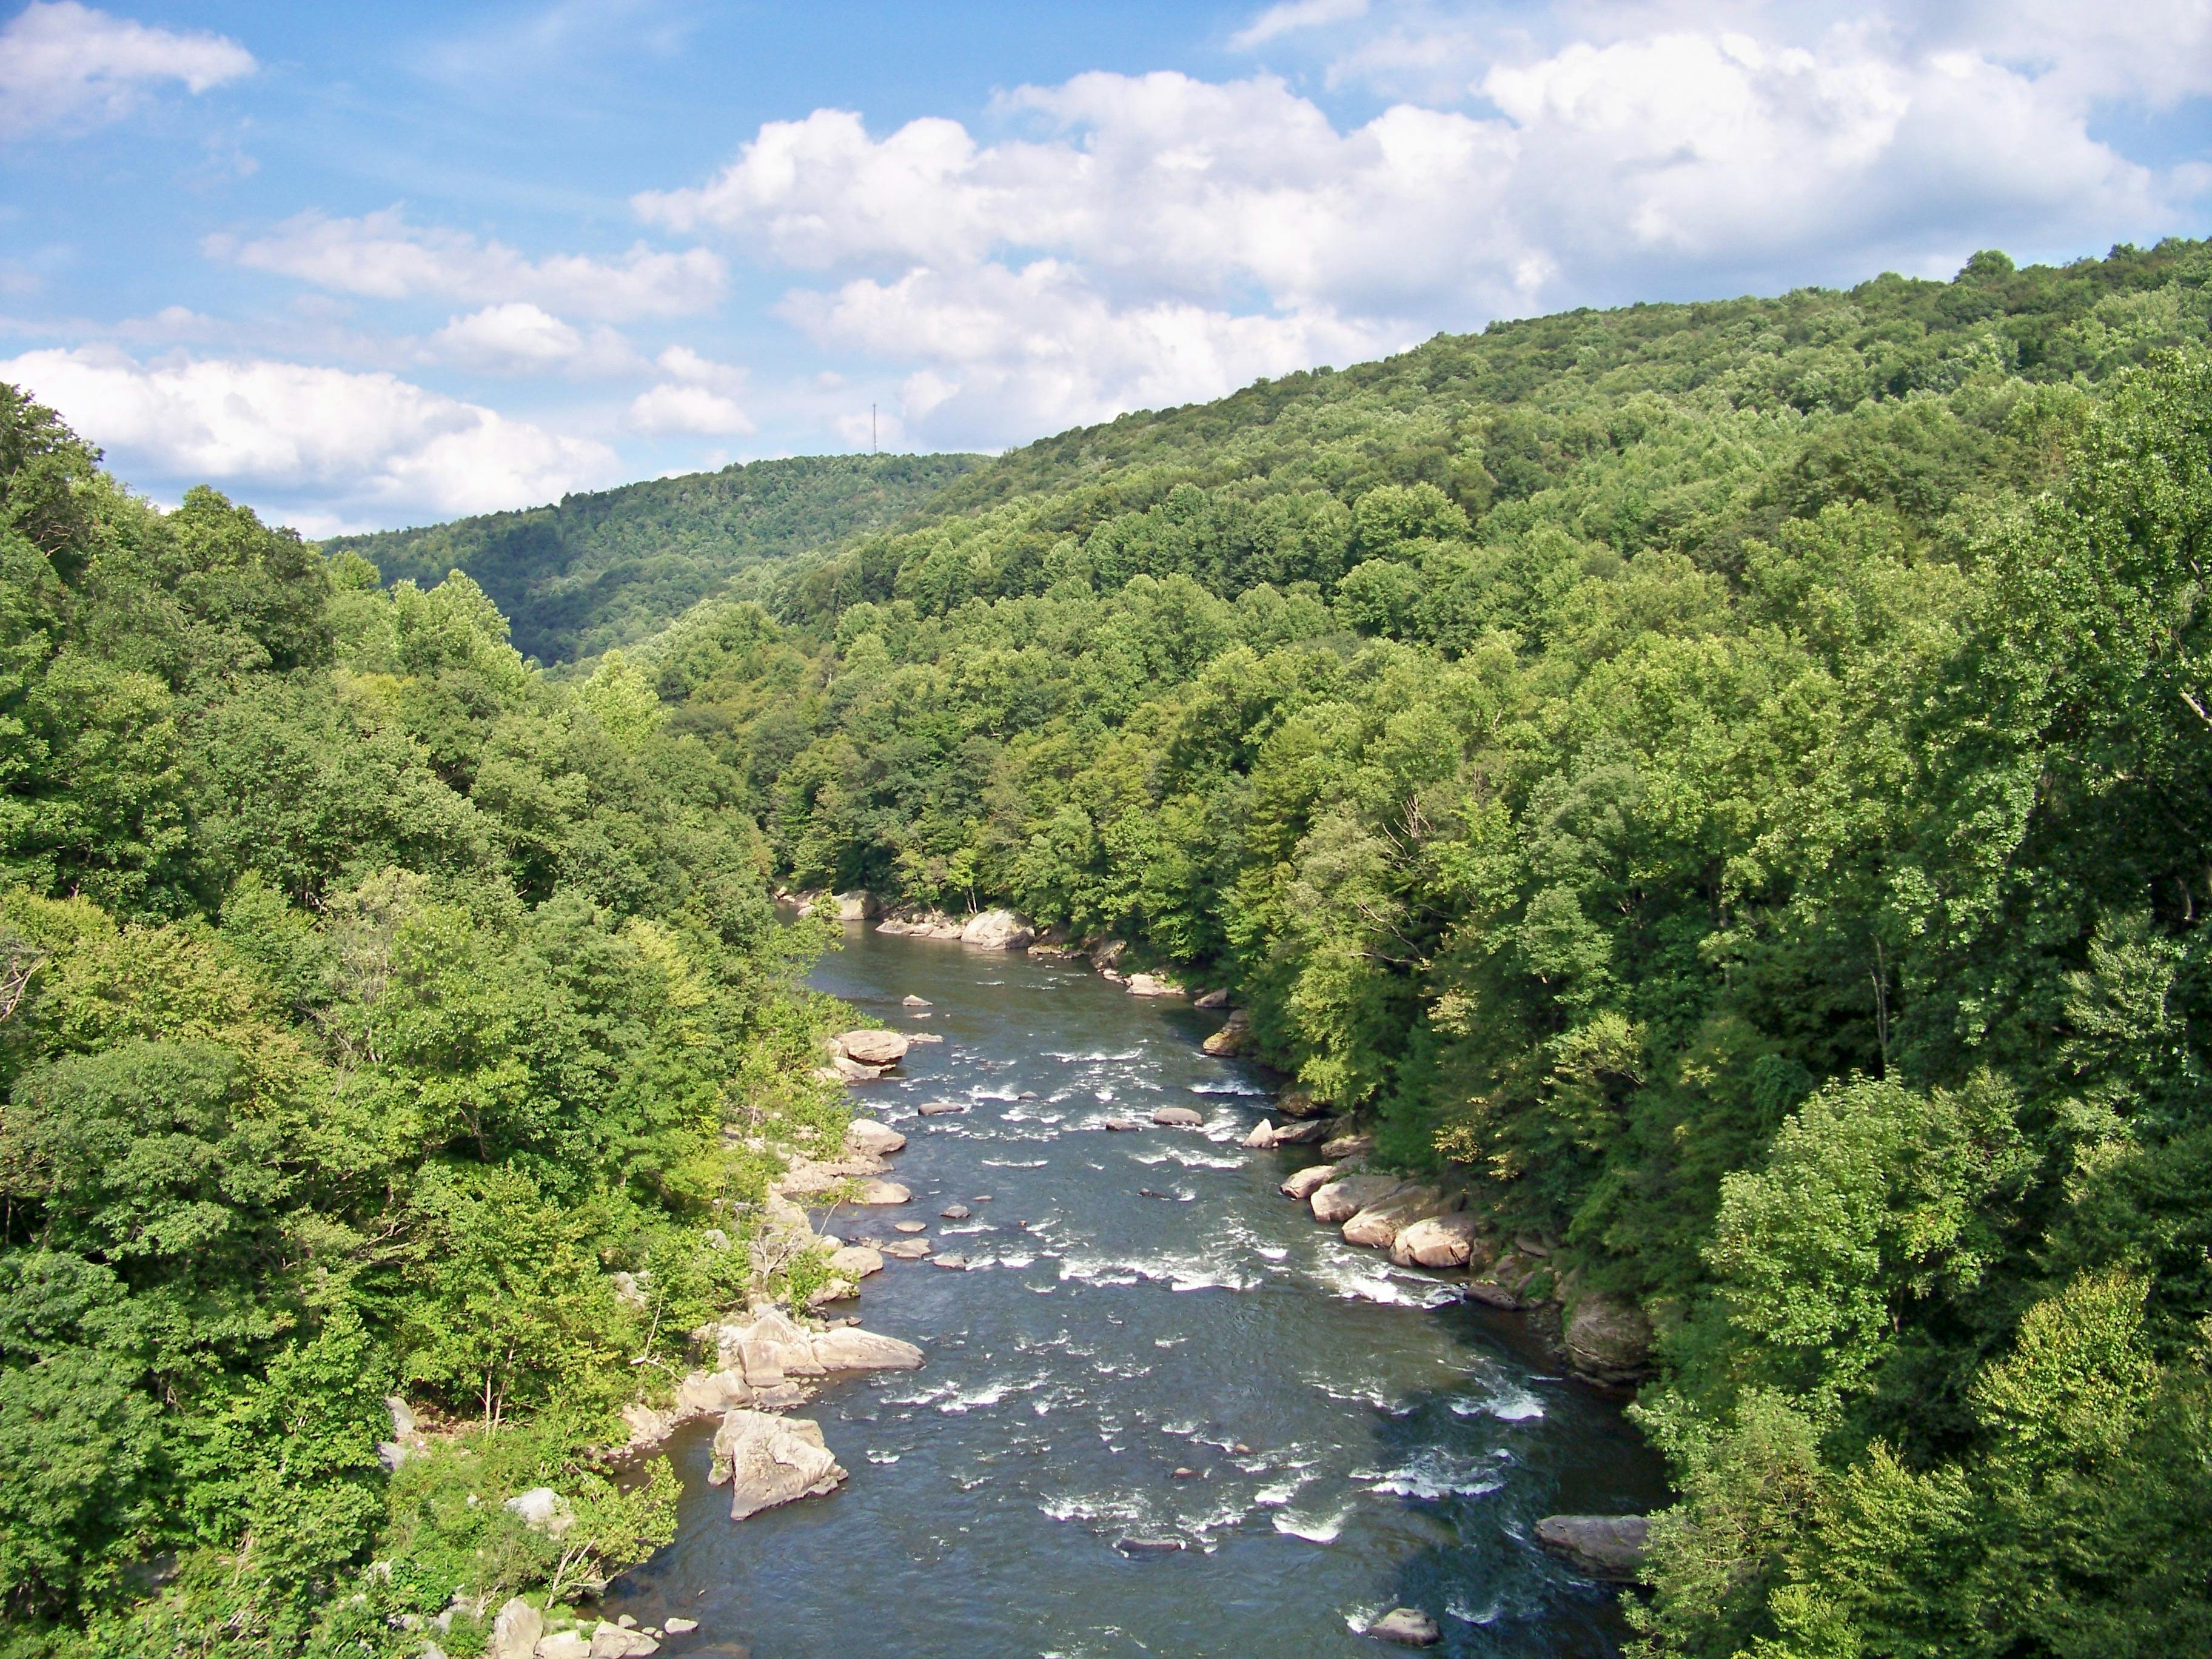 View of the Youghiogheny River in Ohiopyle, PA.